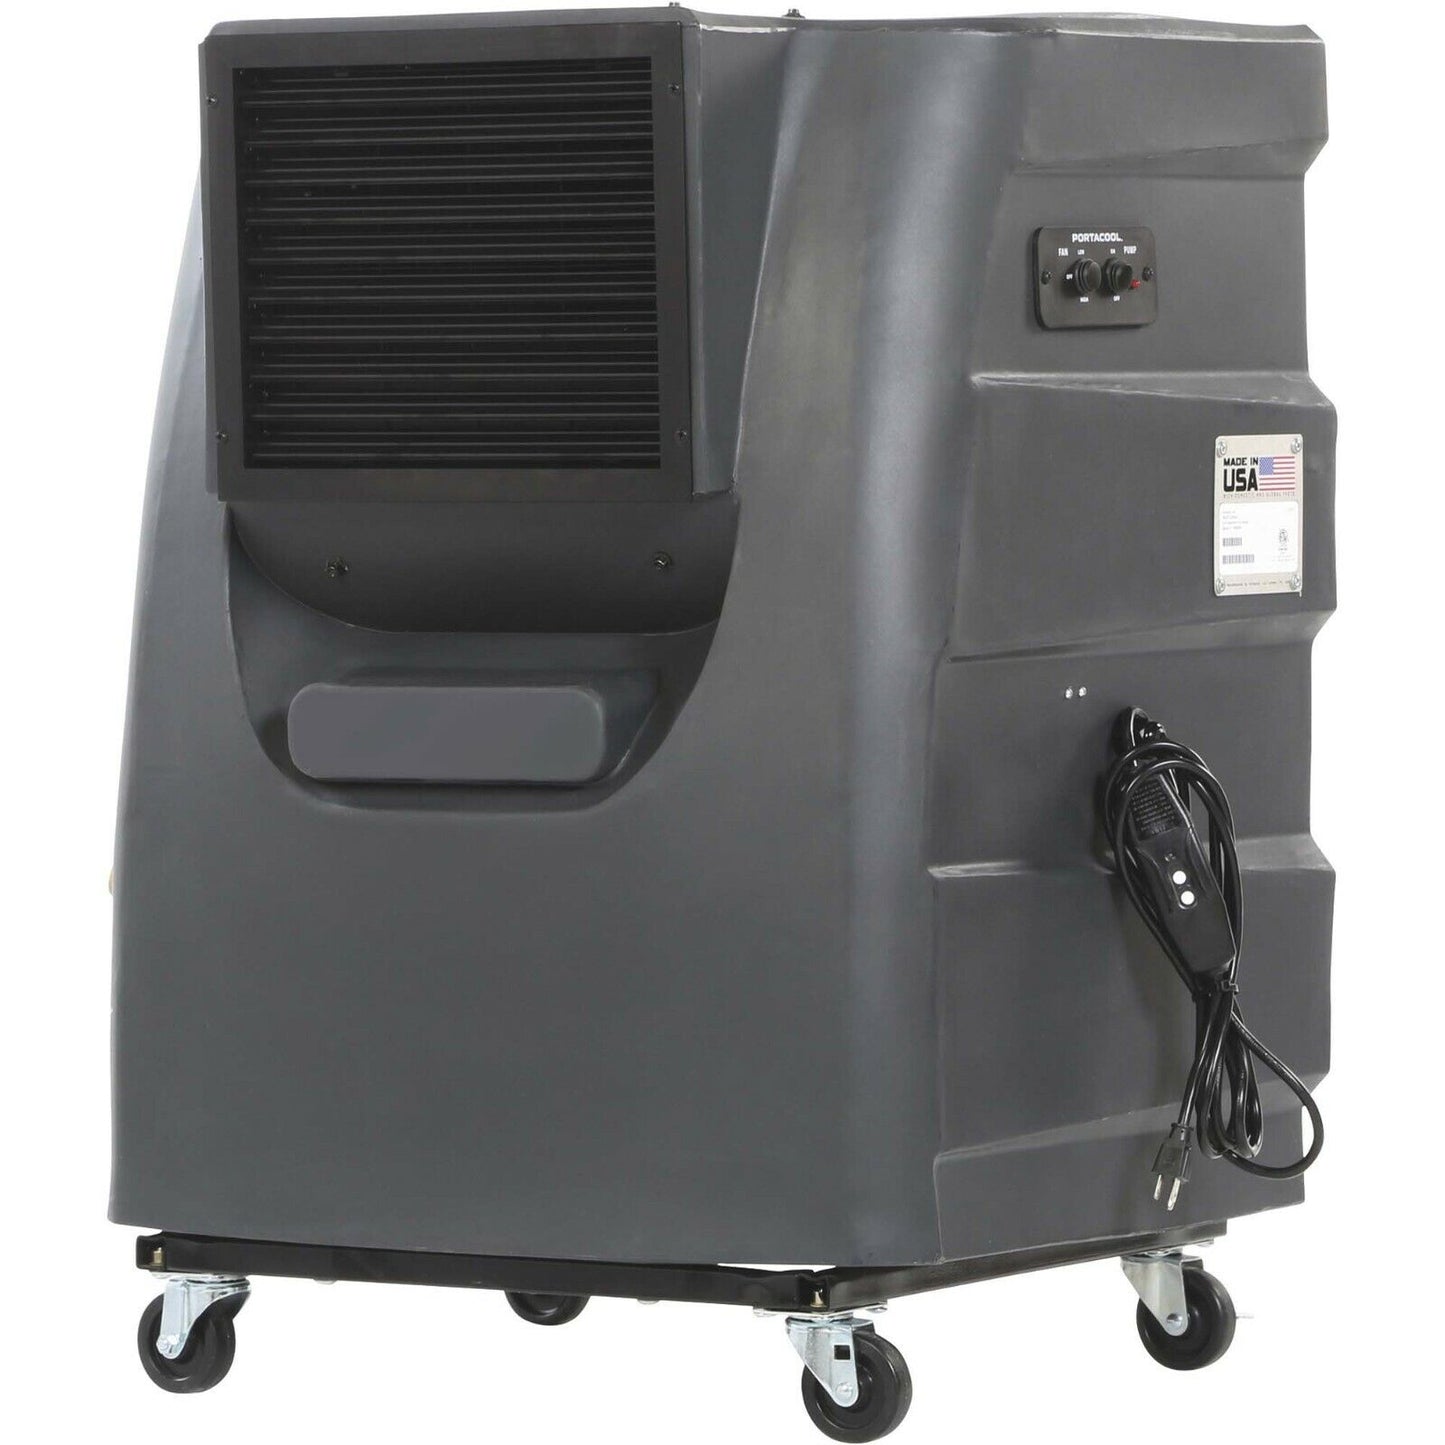 Portable Evaporative Cooler - Direct Drive - 2 Speed - 16 Gallon - Industrial